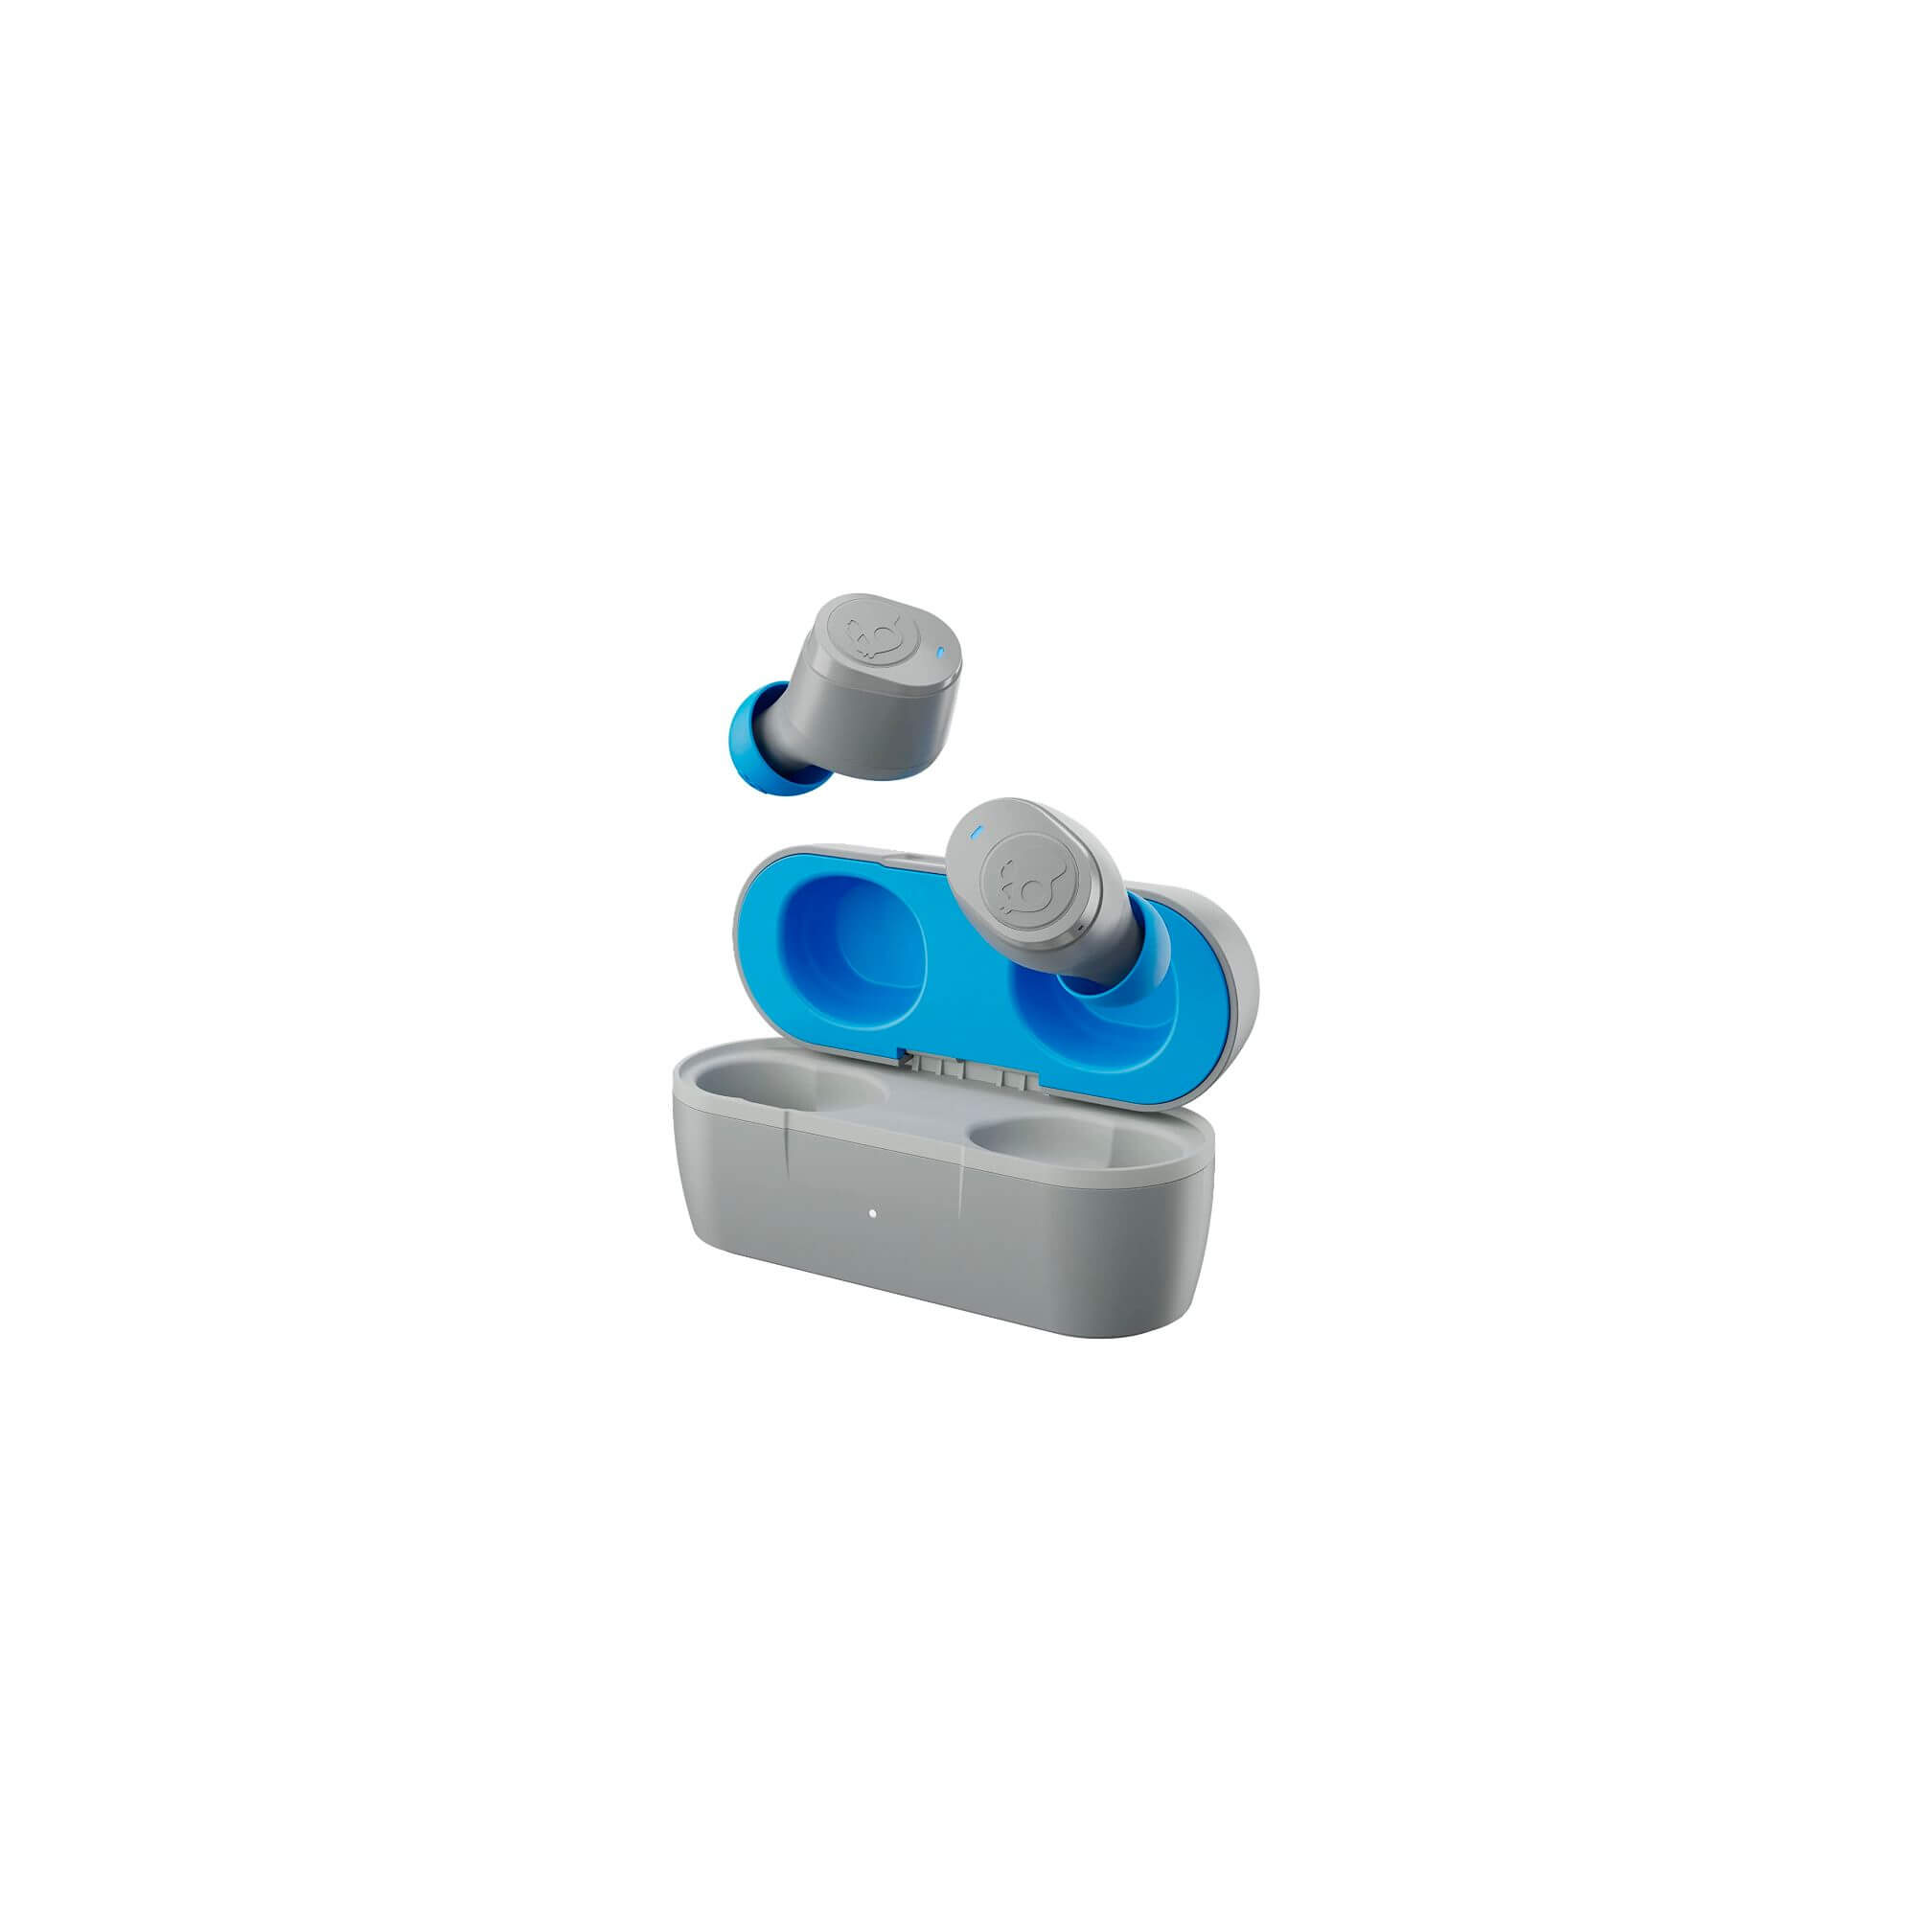 Quick Guide To Resetting Skullcandy Jib True Wireless Earbuds